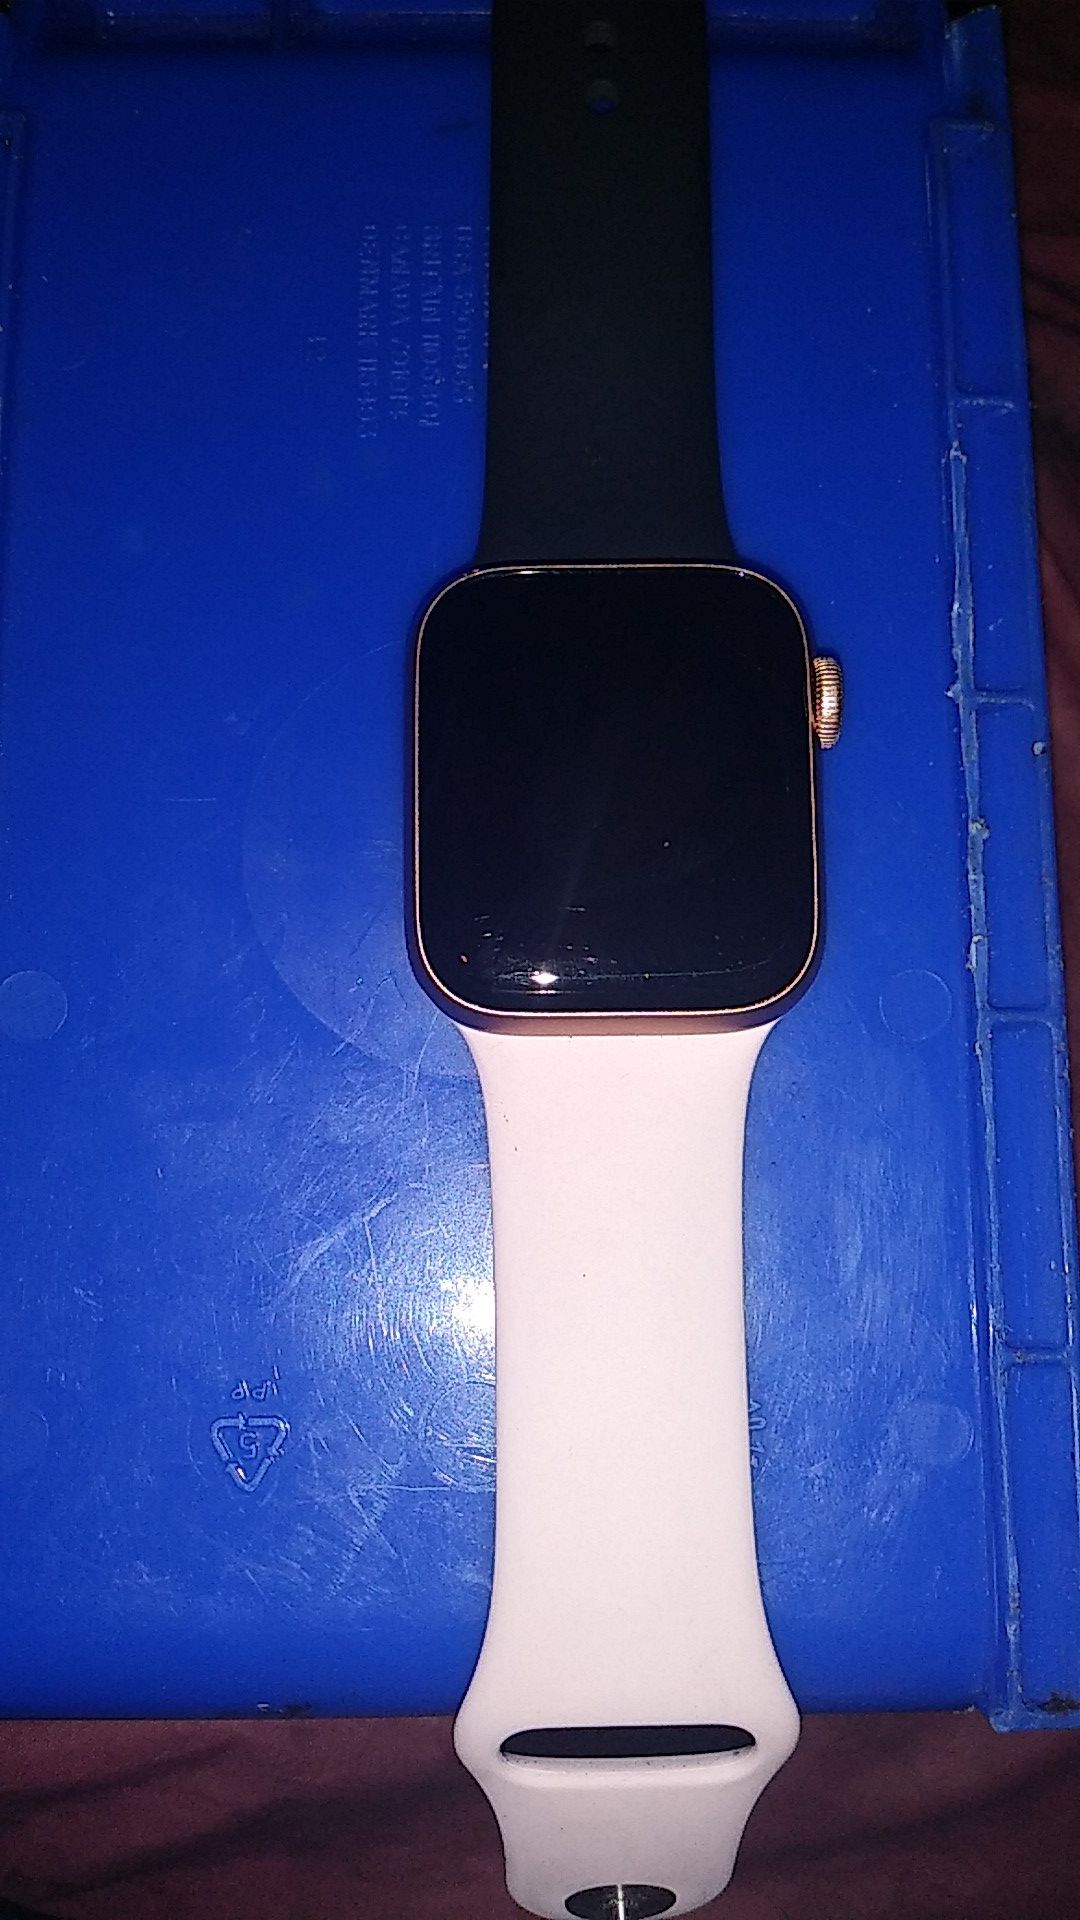 Apple iwatch series 5 unboxed yet never used